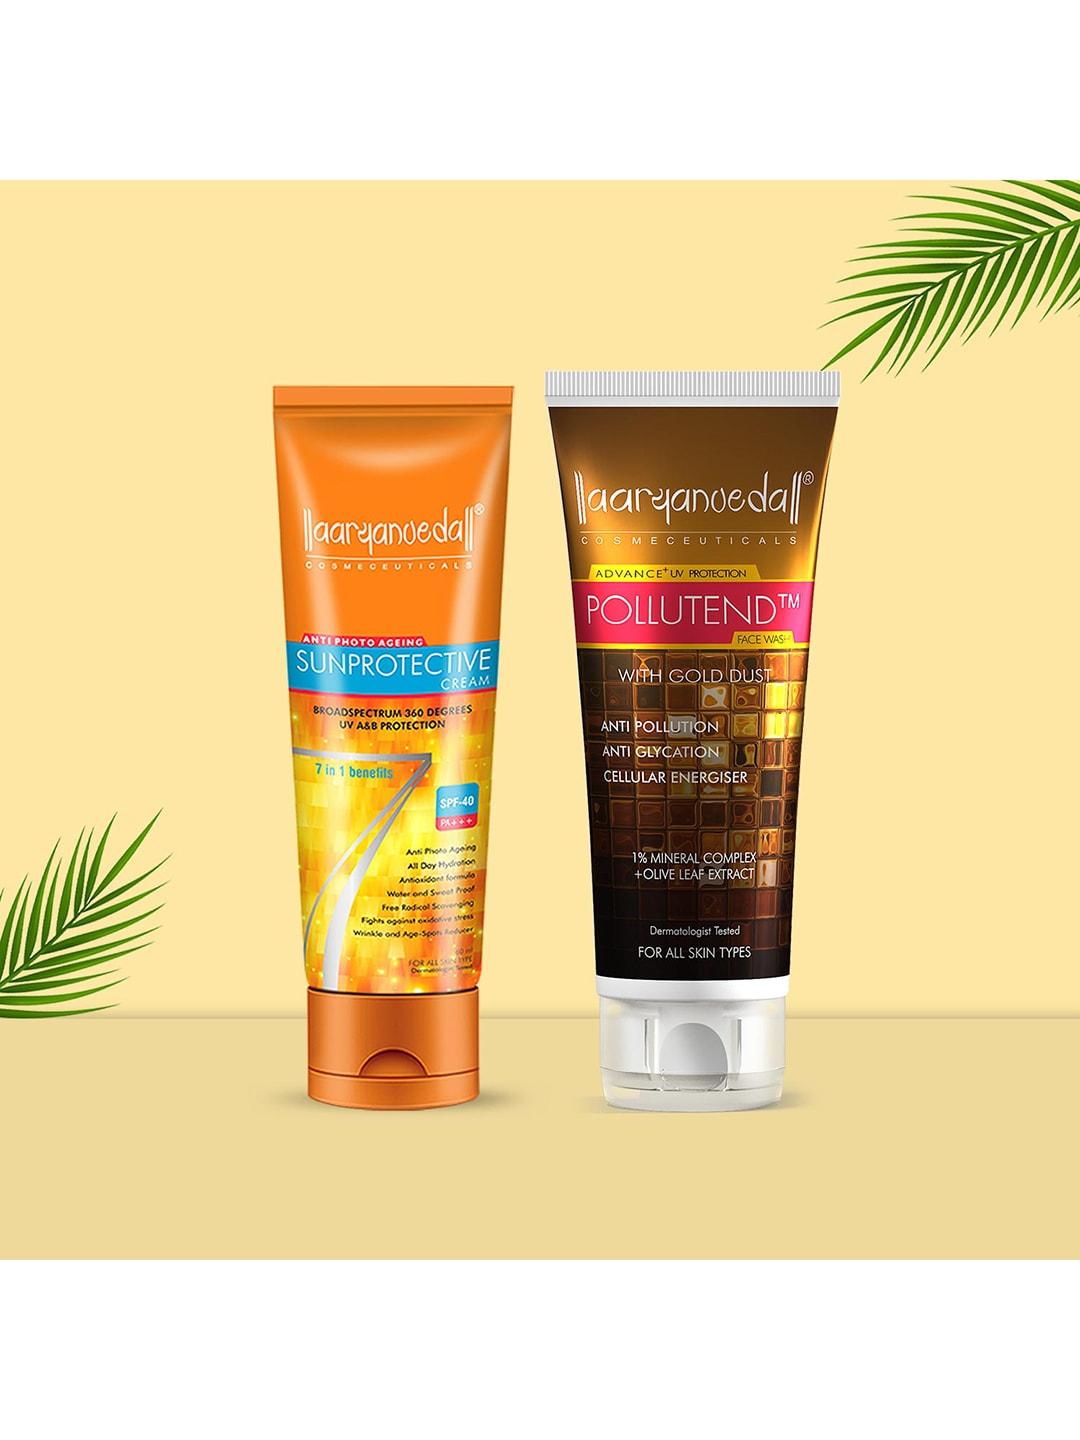 Aryanveda Sunscreen Spf 40 PA+++ With Pollutend Face Wash For Sunprotective 120g each